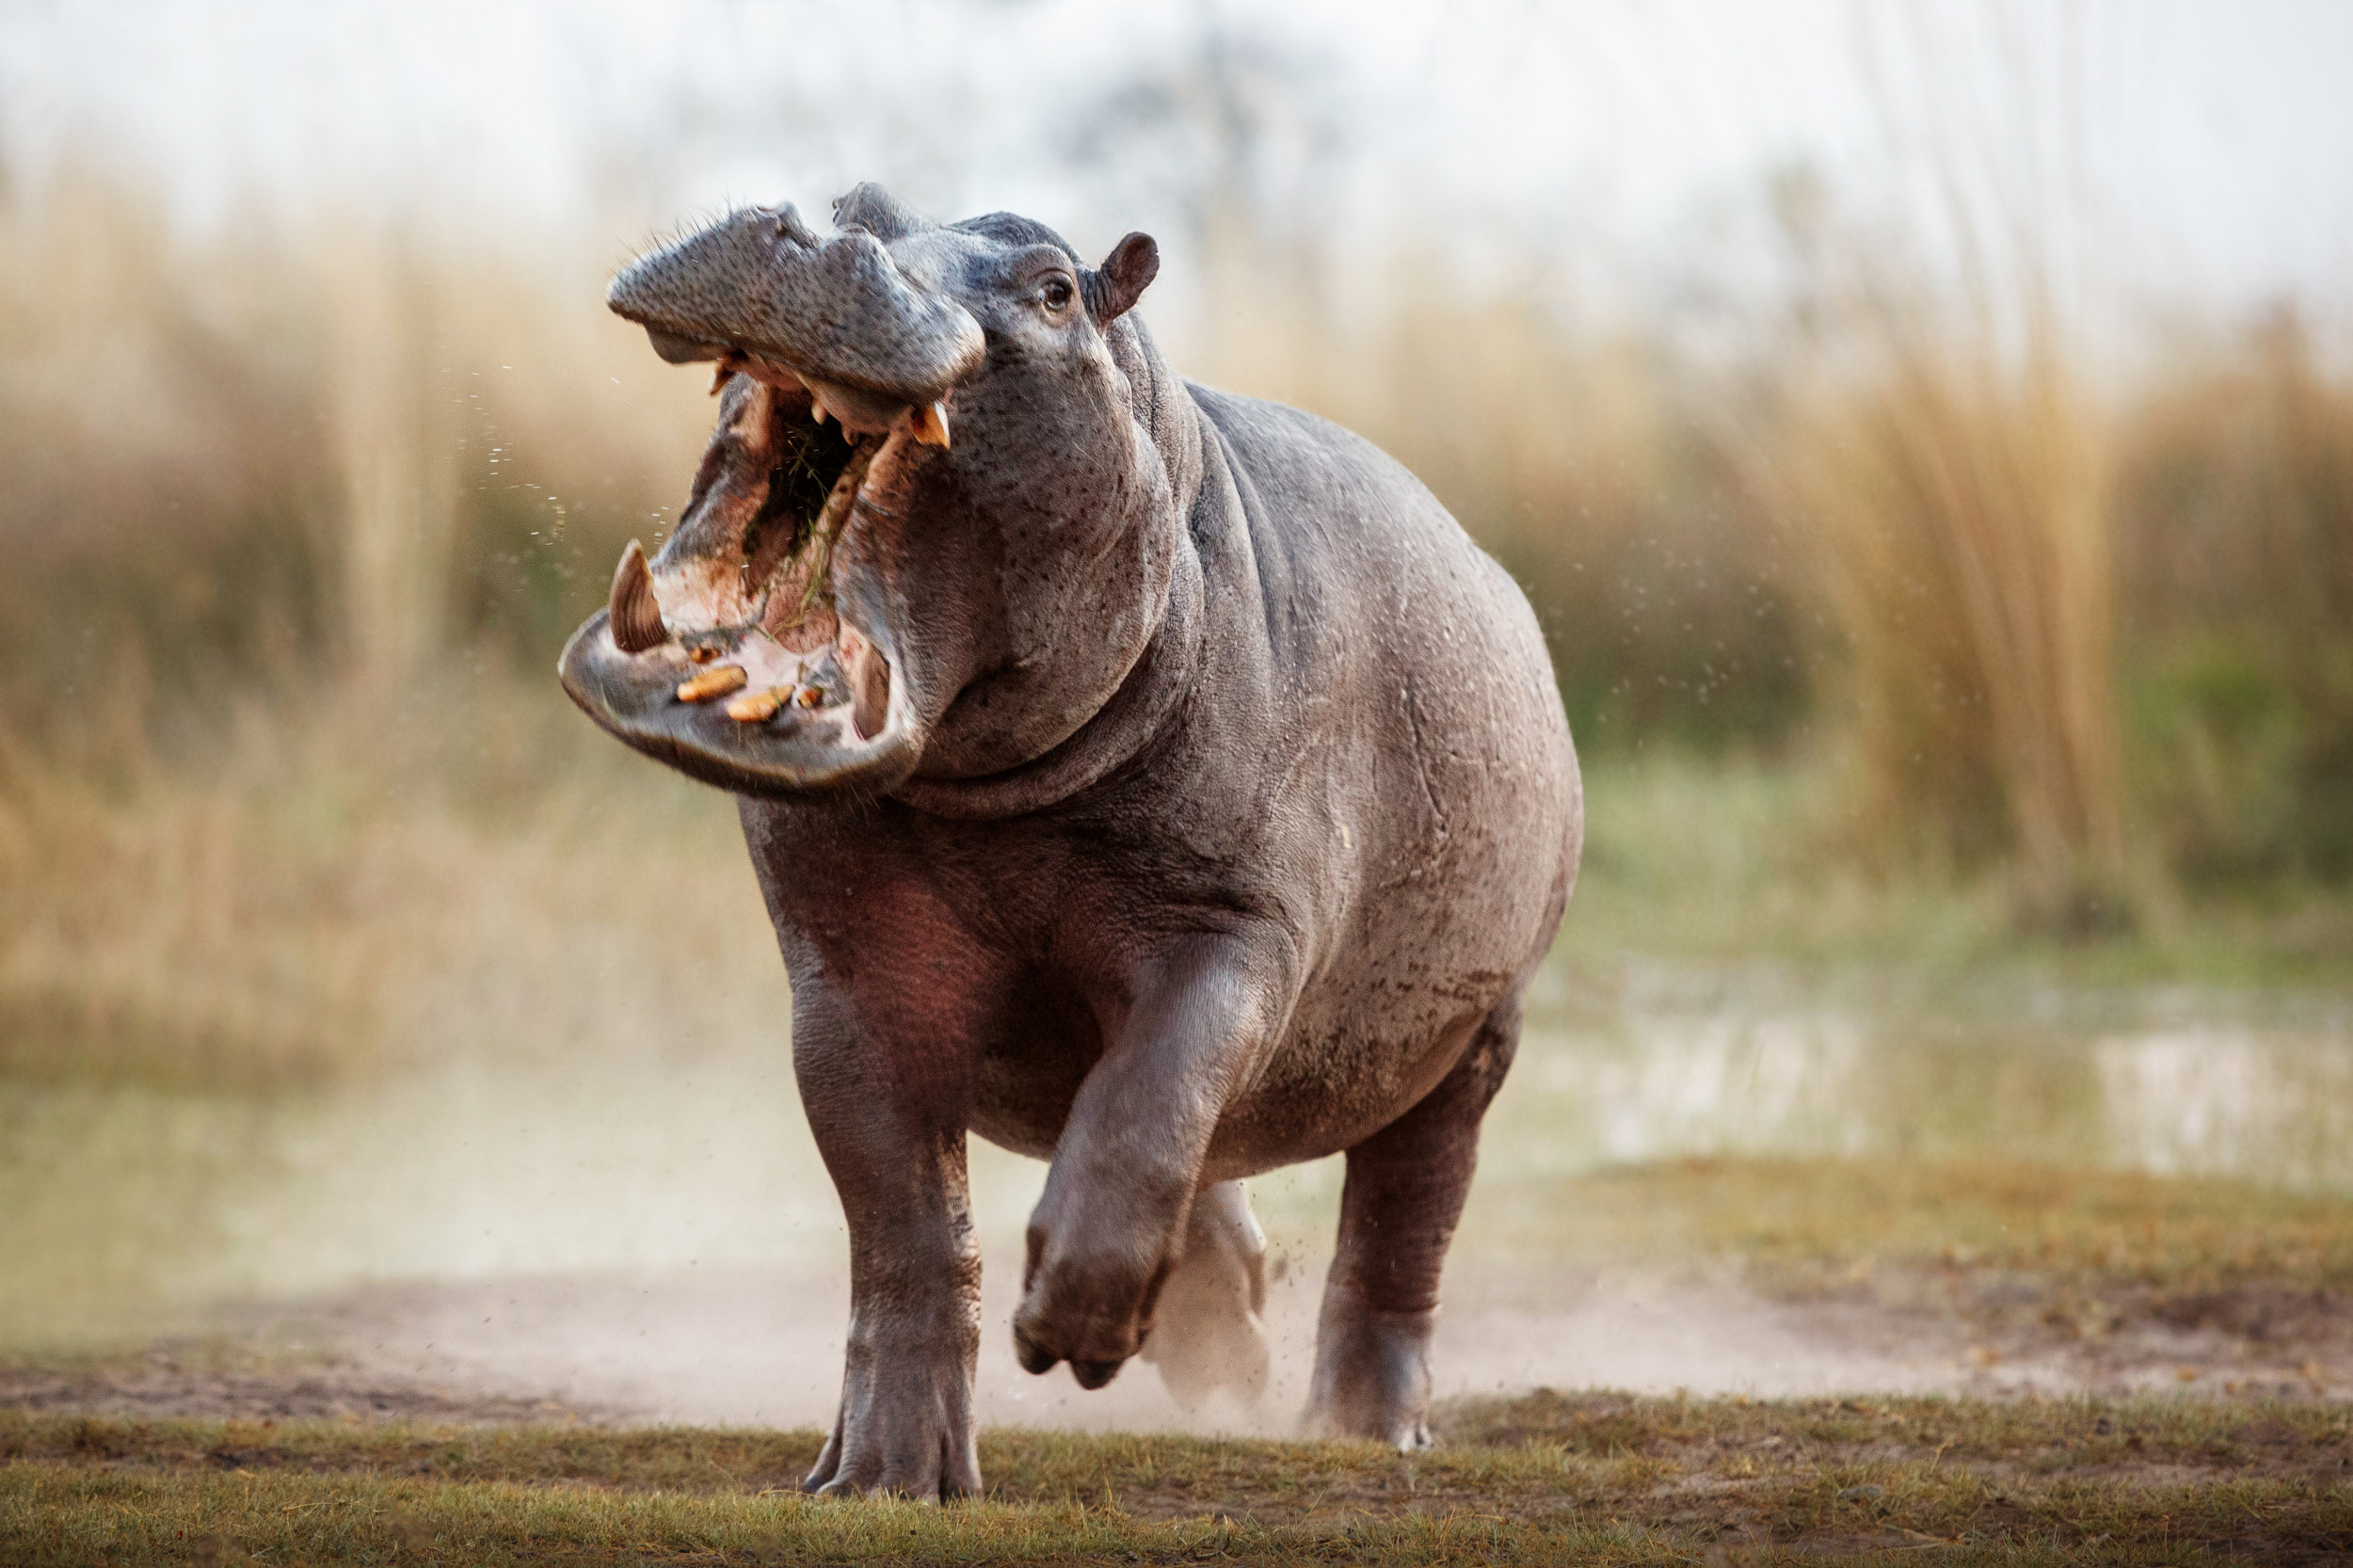 'Beast' Hippo Attacks Man, Bites Large Chunk of Flesh From His Shoulder